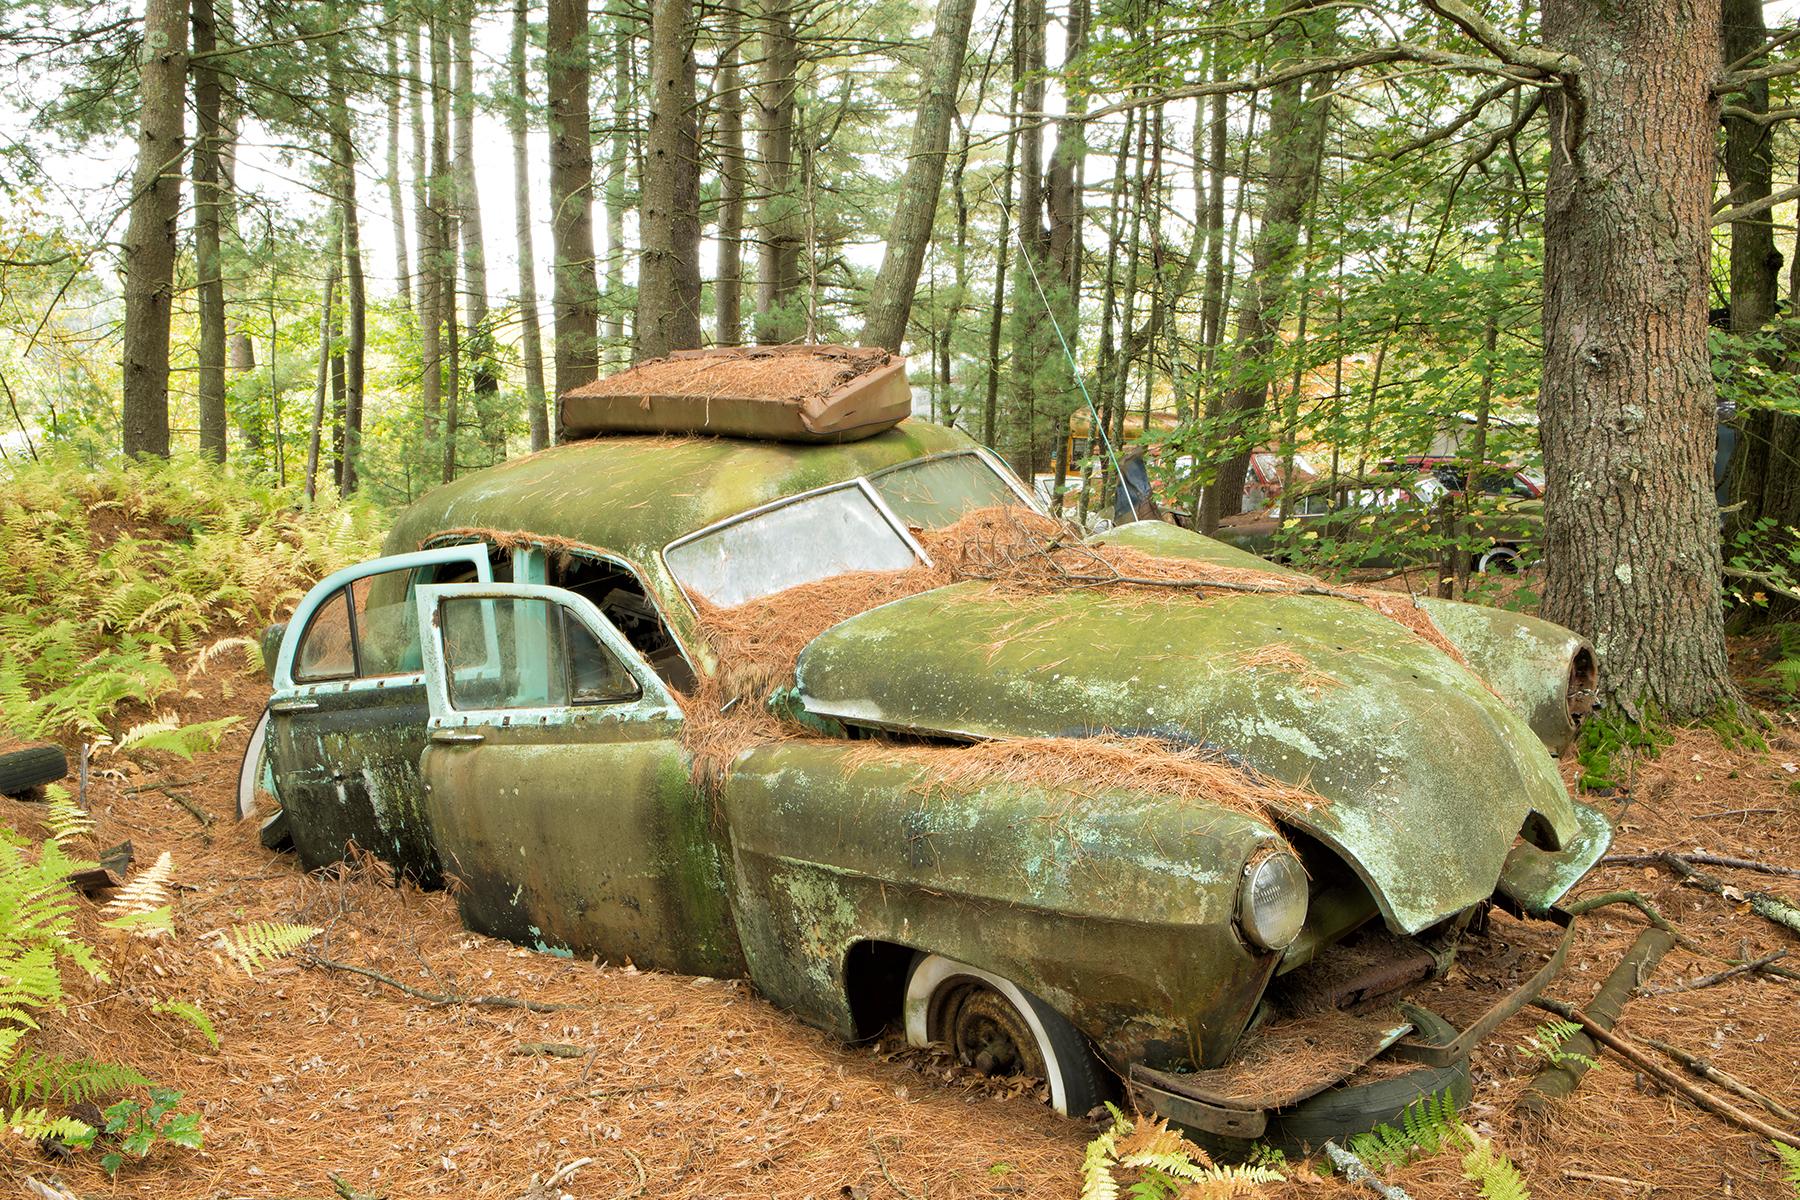 Rebecca Skinner’s “Incapacitated” is part of her "Rust to Dust" series documenting the beauty of the decaying automobile. The 20 x 30 inch color photo is of an antique car resting in a woodsy landscape. With satin finish, the image is infused